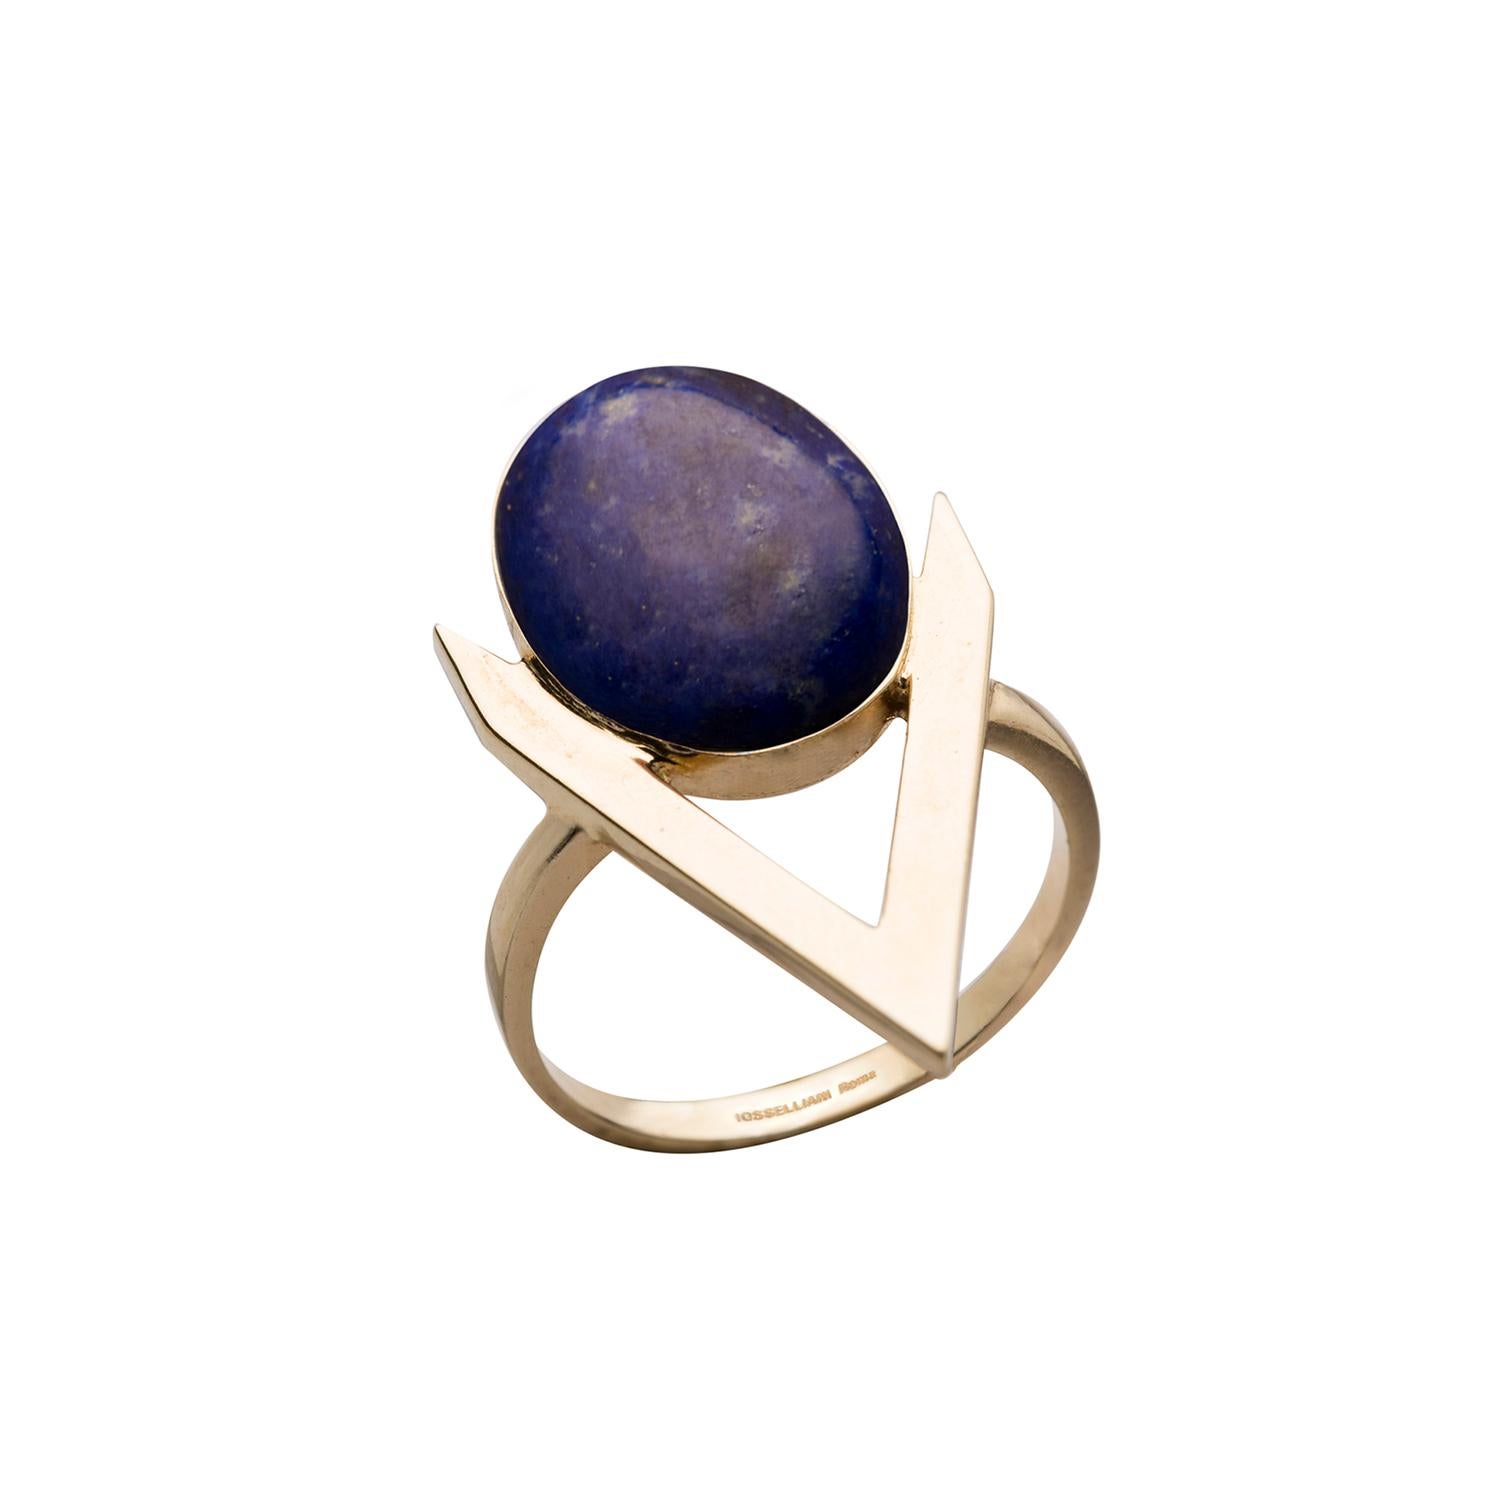 Add jewellery with a modern, feminine attitude to your outfit with this 9 Karat gold ring from Iosselliani.  Crafted in Italy, the ring features a medium sized lapis lazuli cabochon framed into a V shape. Perfect as a gift of love, the ring is